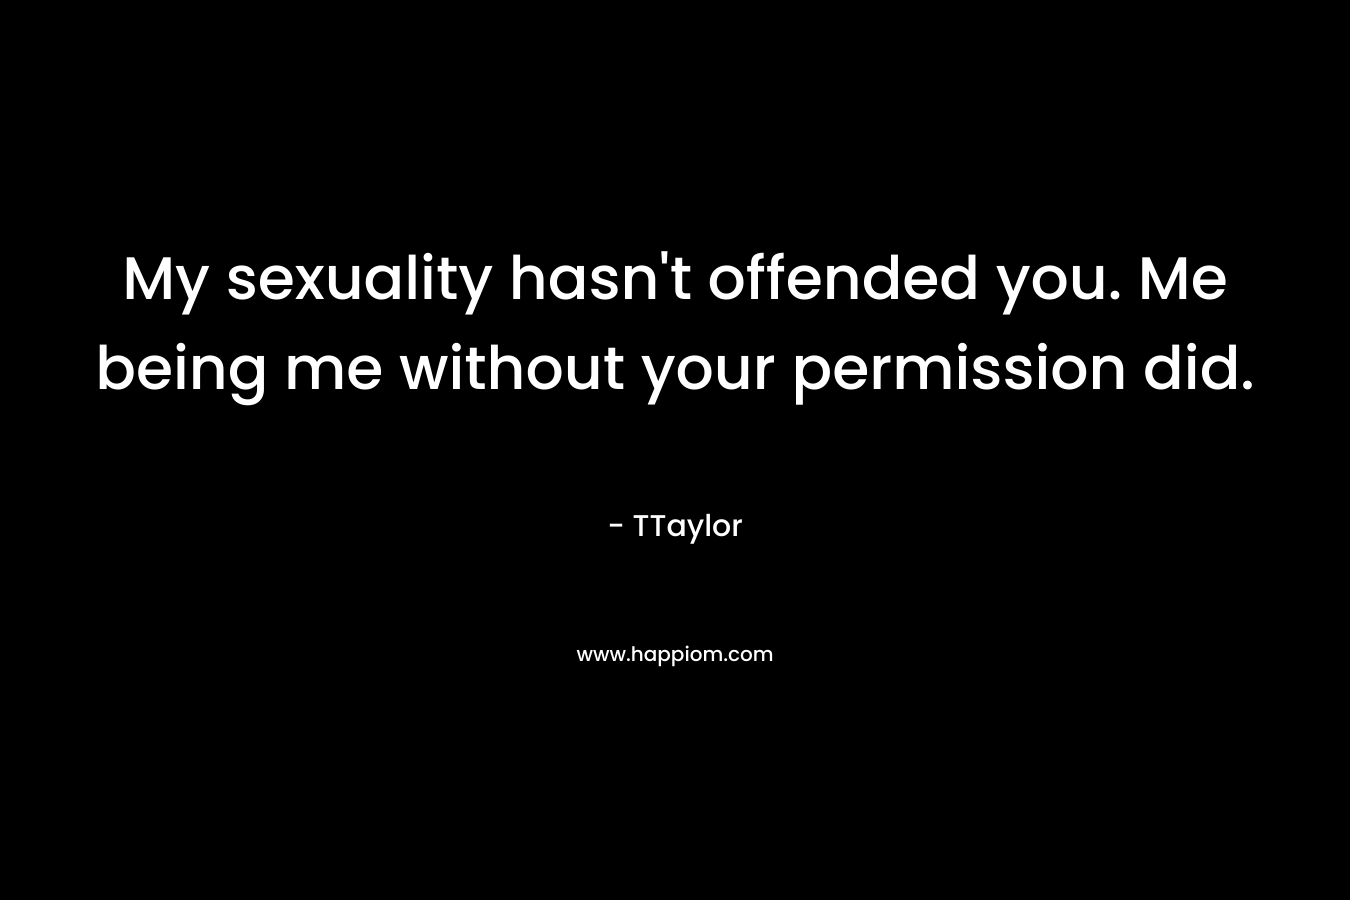 My sexuality hasn’t offended you. Me being me without your permission did. – TTaylor